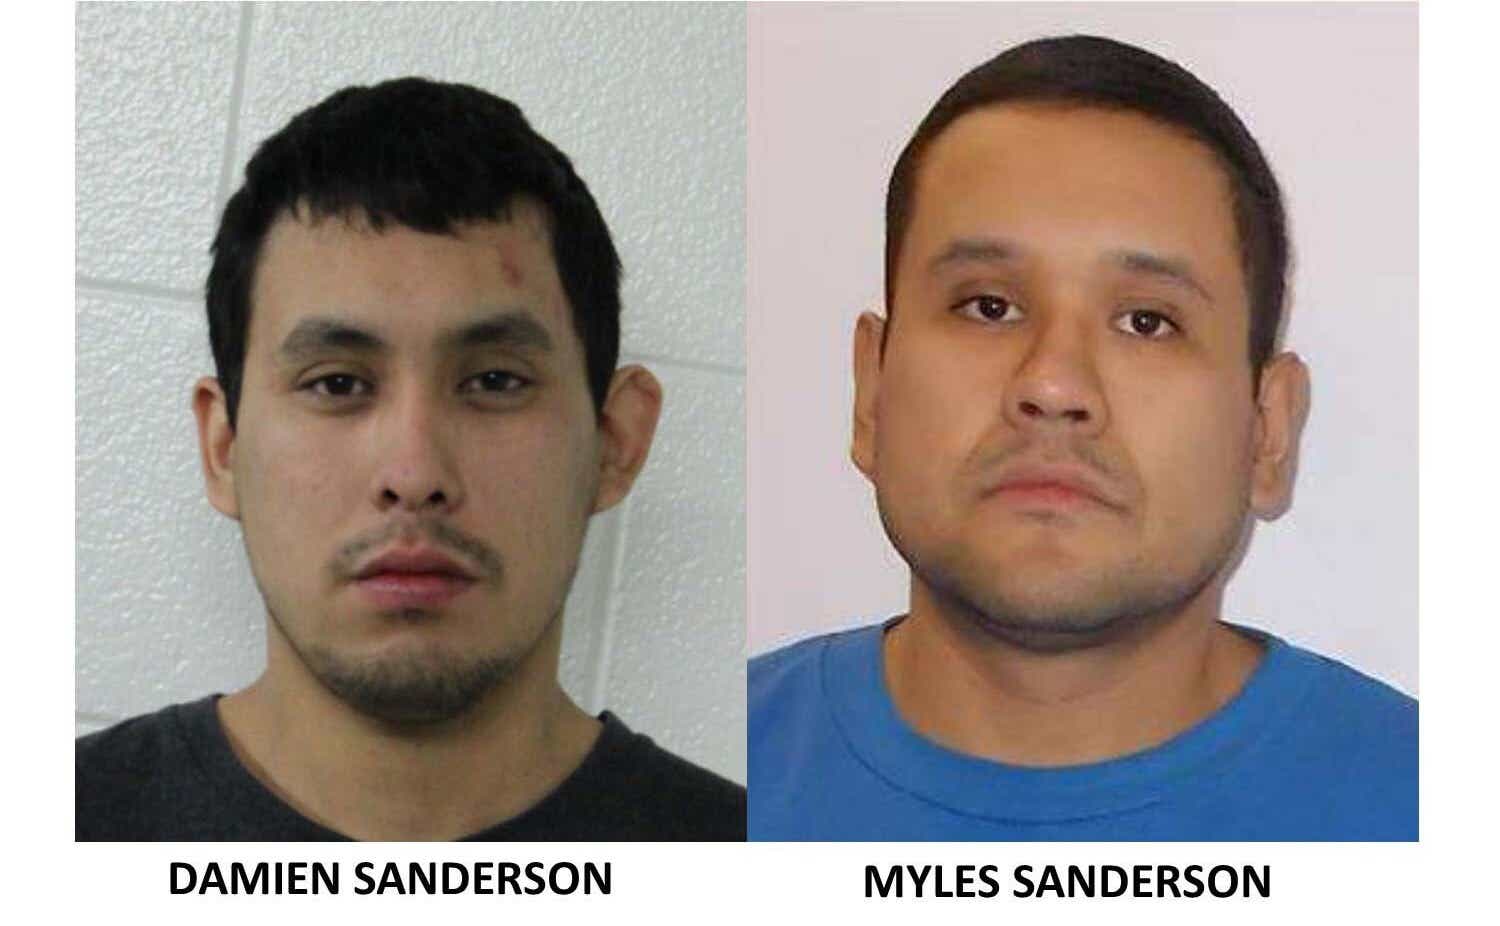 A photo shows Damien Sanderson (L) and Myles Sanderson (R), two suspected attackers